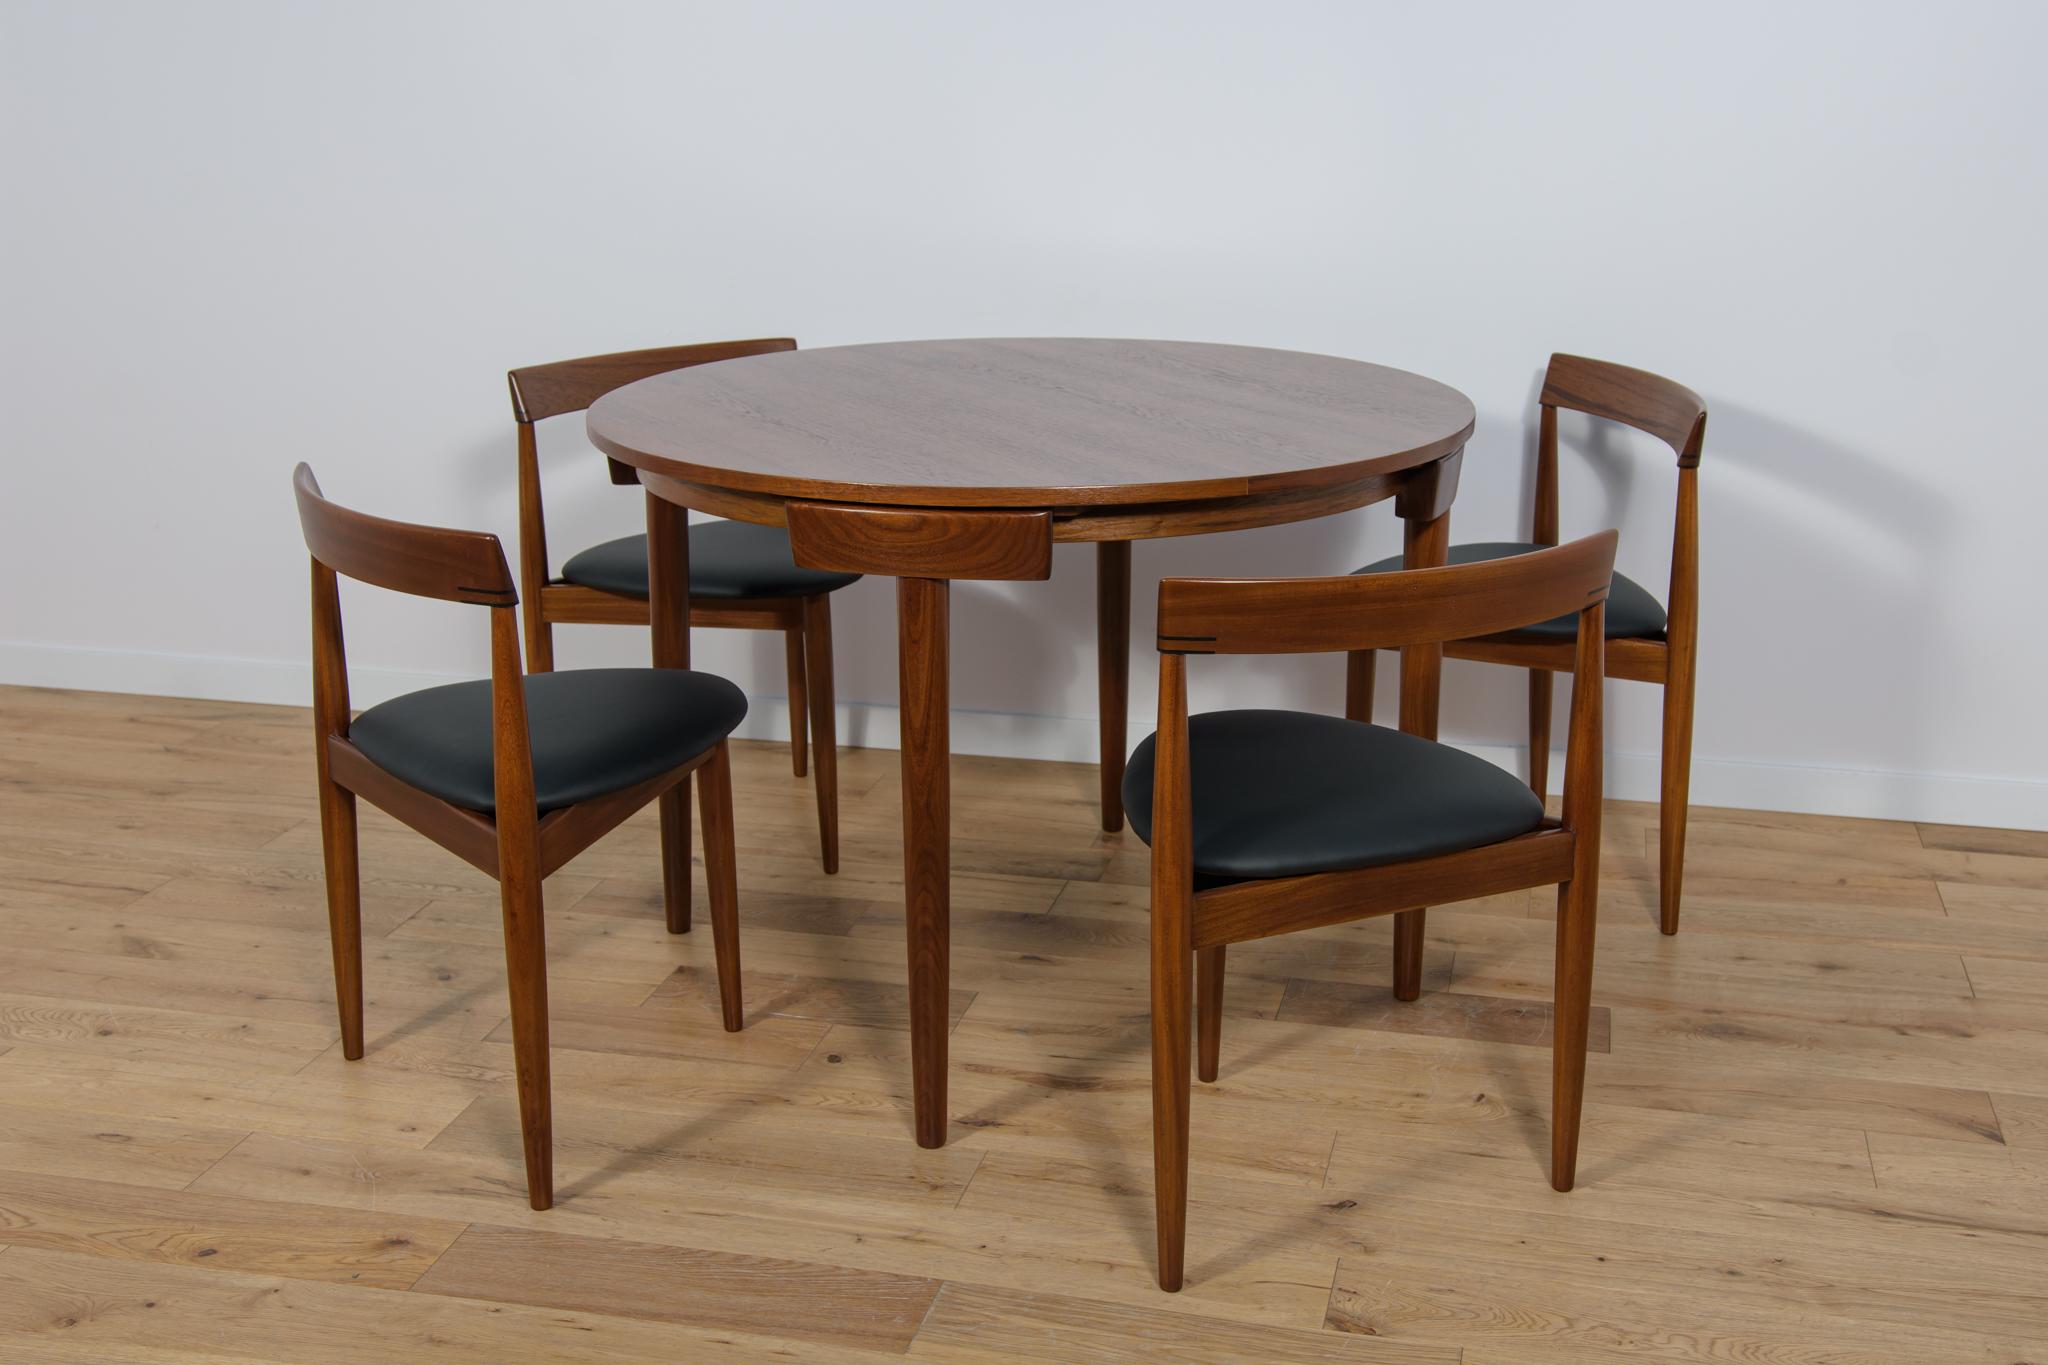 Mid-Century Modern Mid-Century Teak Dining Table and Chairs Set by Hans Olsen for Frem Røjle, 1950s For Sale